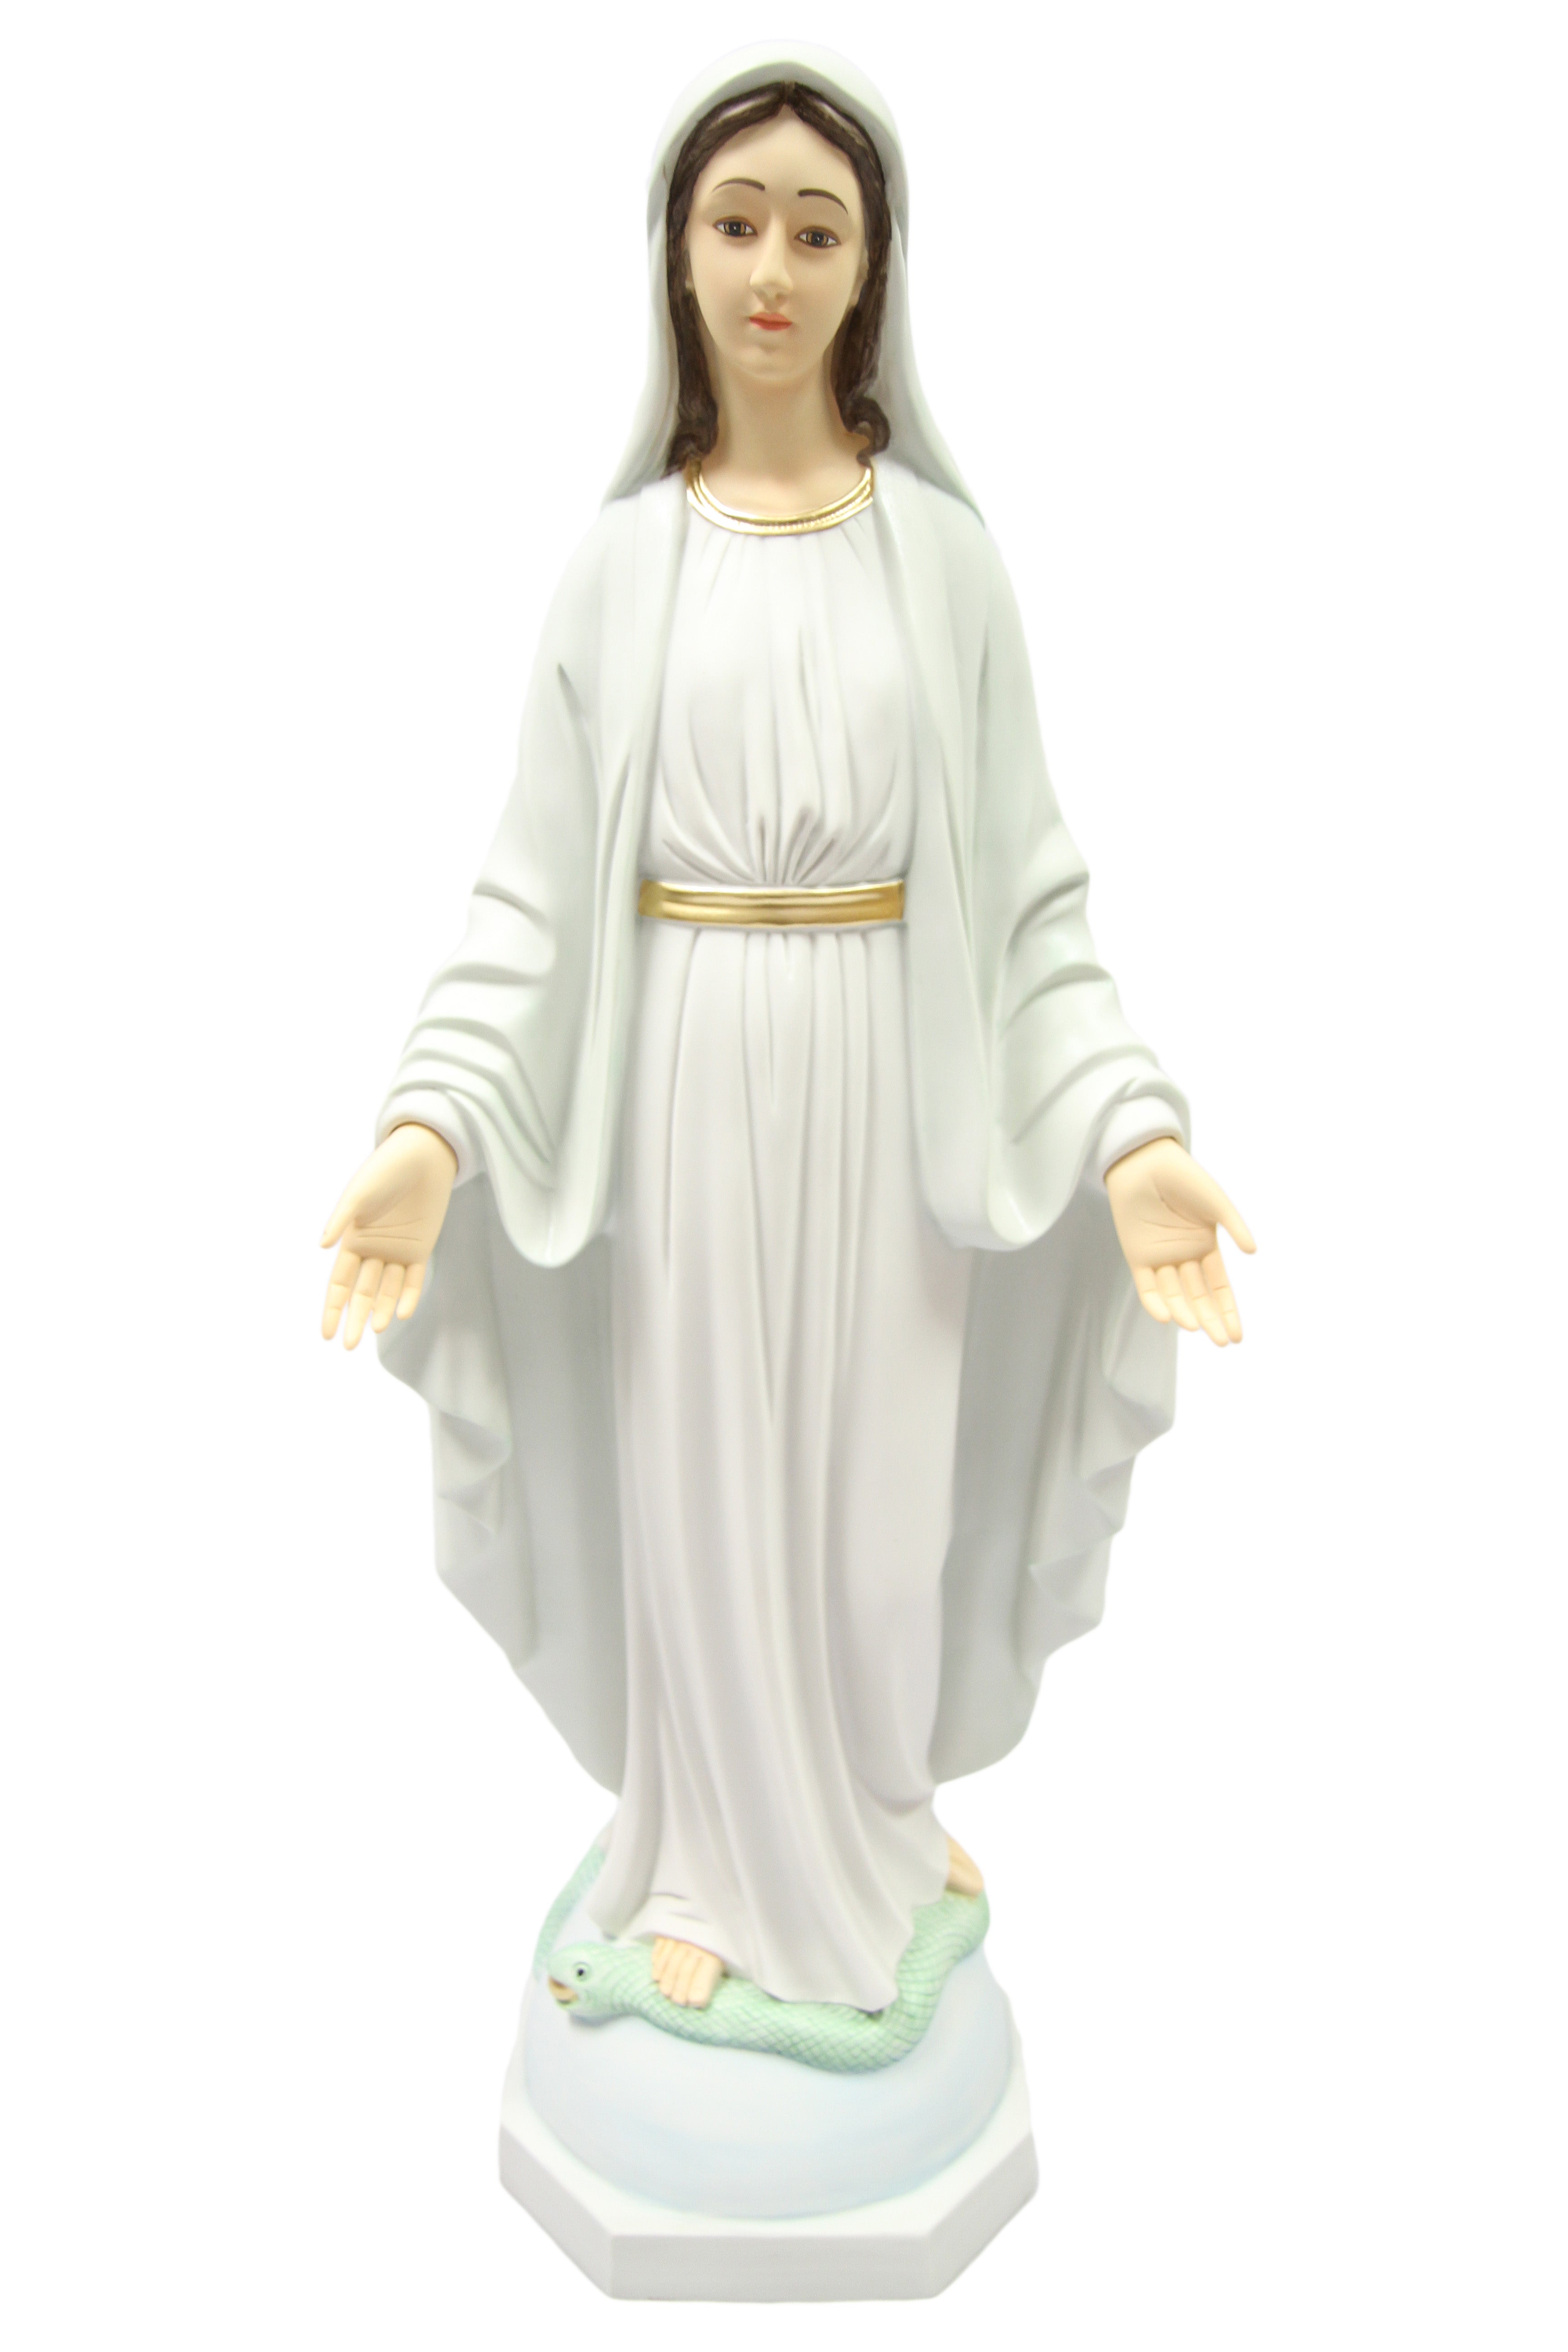 31 Inch Our Lady of Grace Virgin Mary Catholic Religious Statue Vittoria Collection